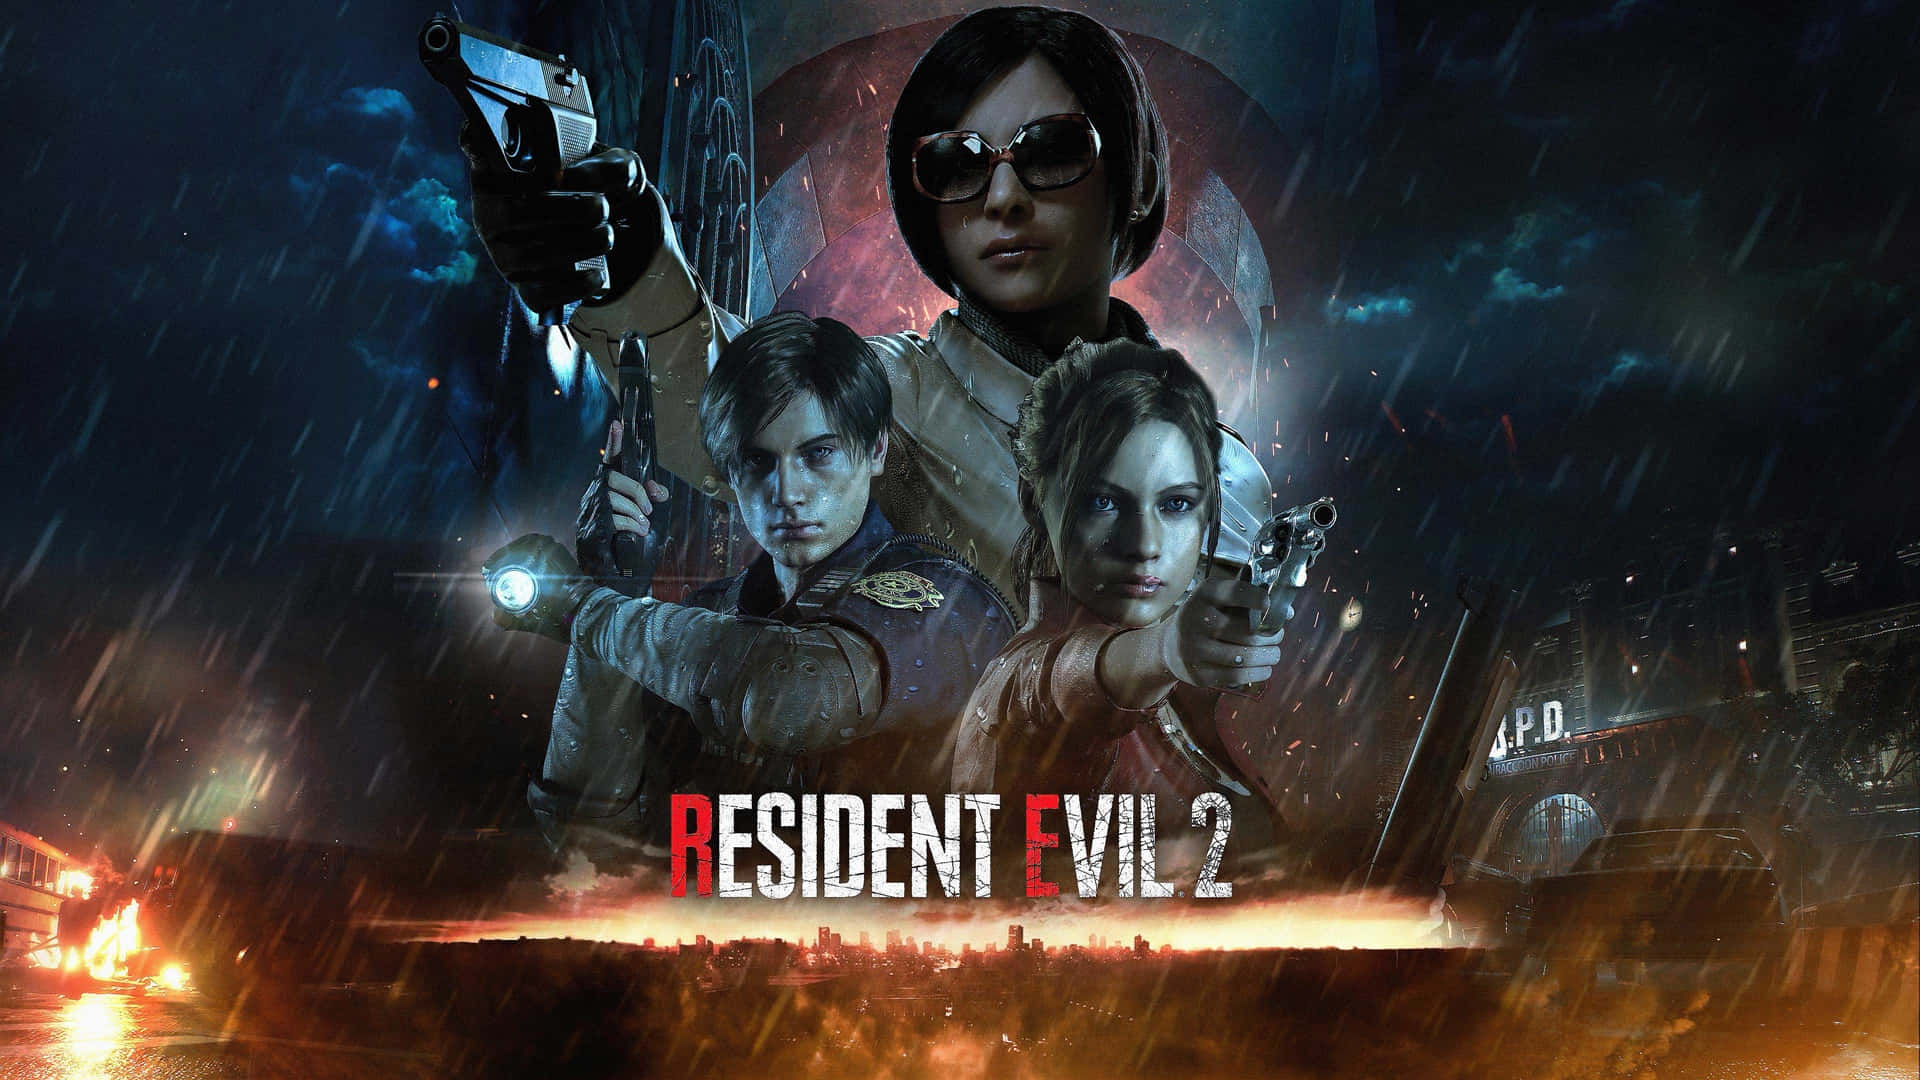 1920x1080 Resident Evil 2 Background Poster Ada, Leon, Claire Drawing Guns